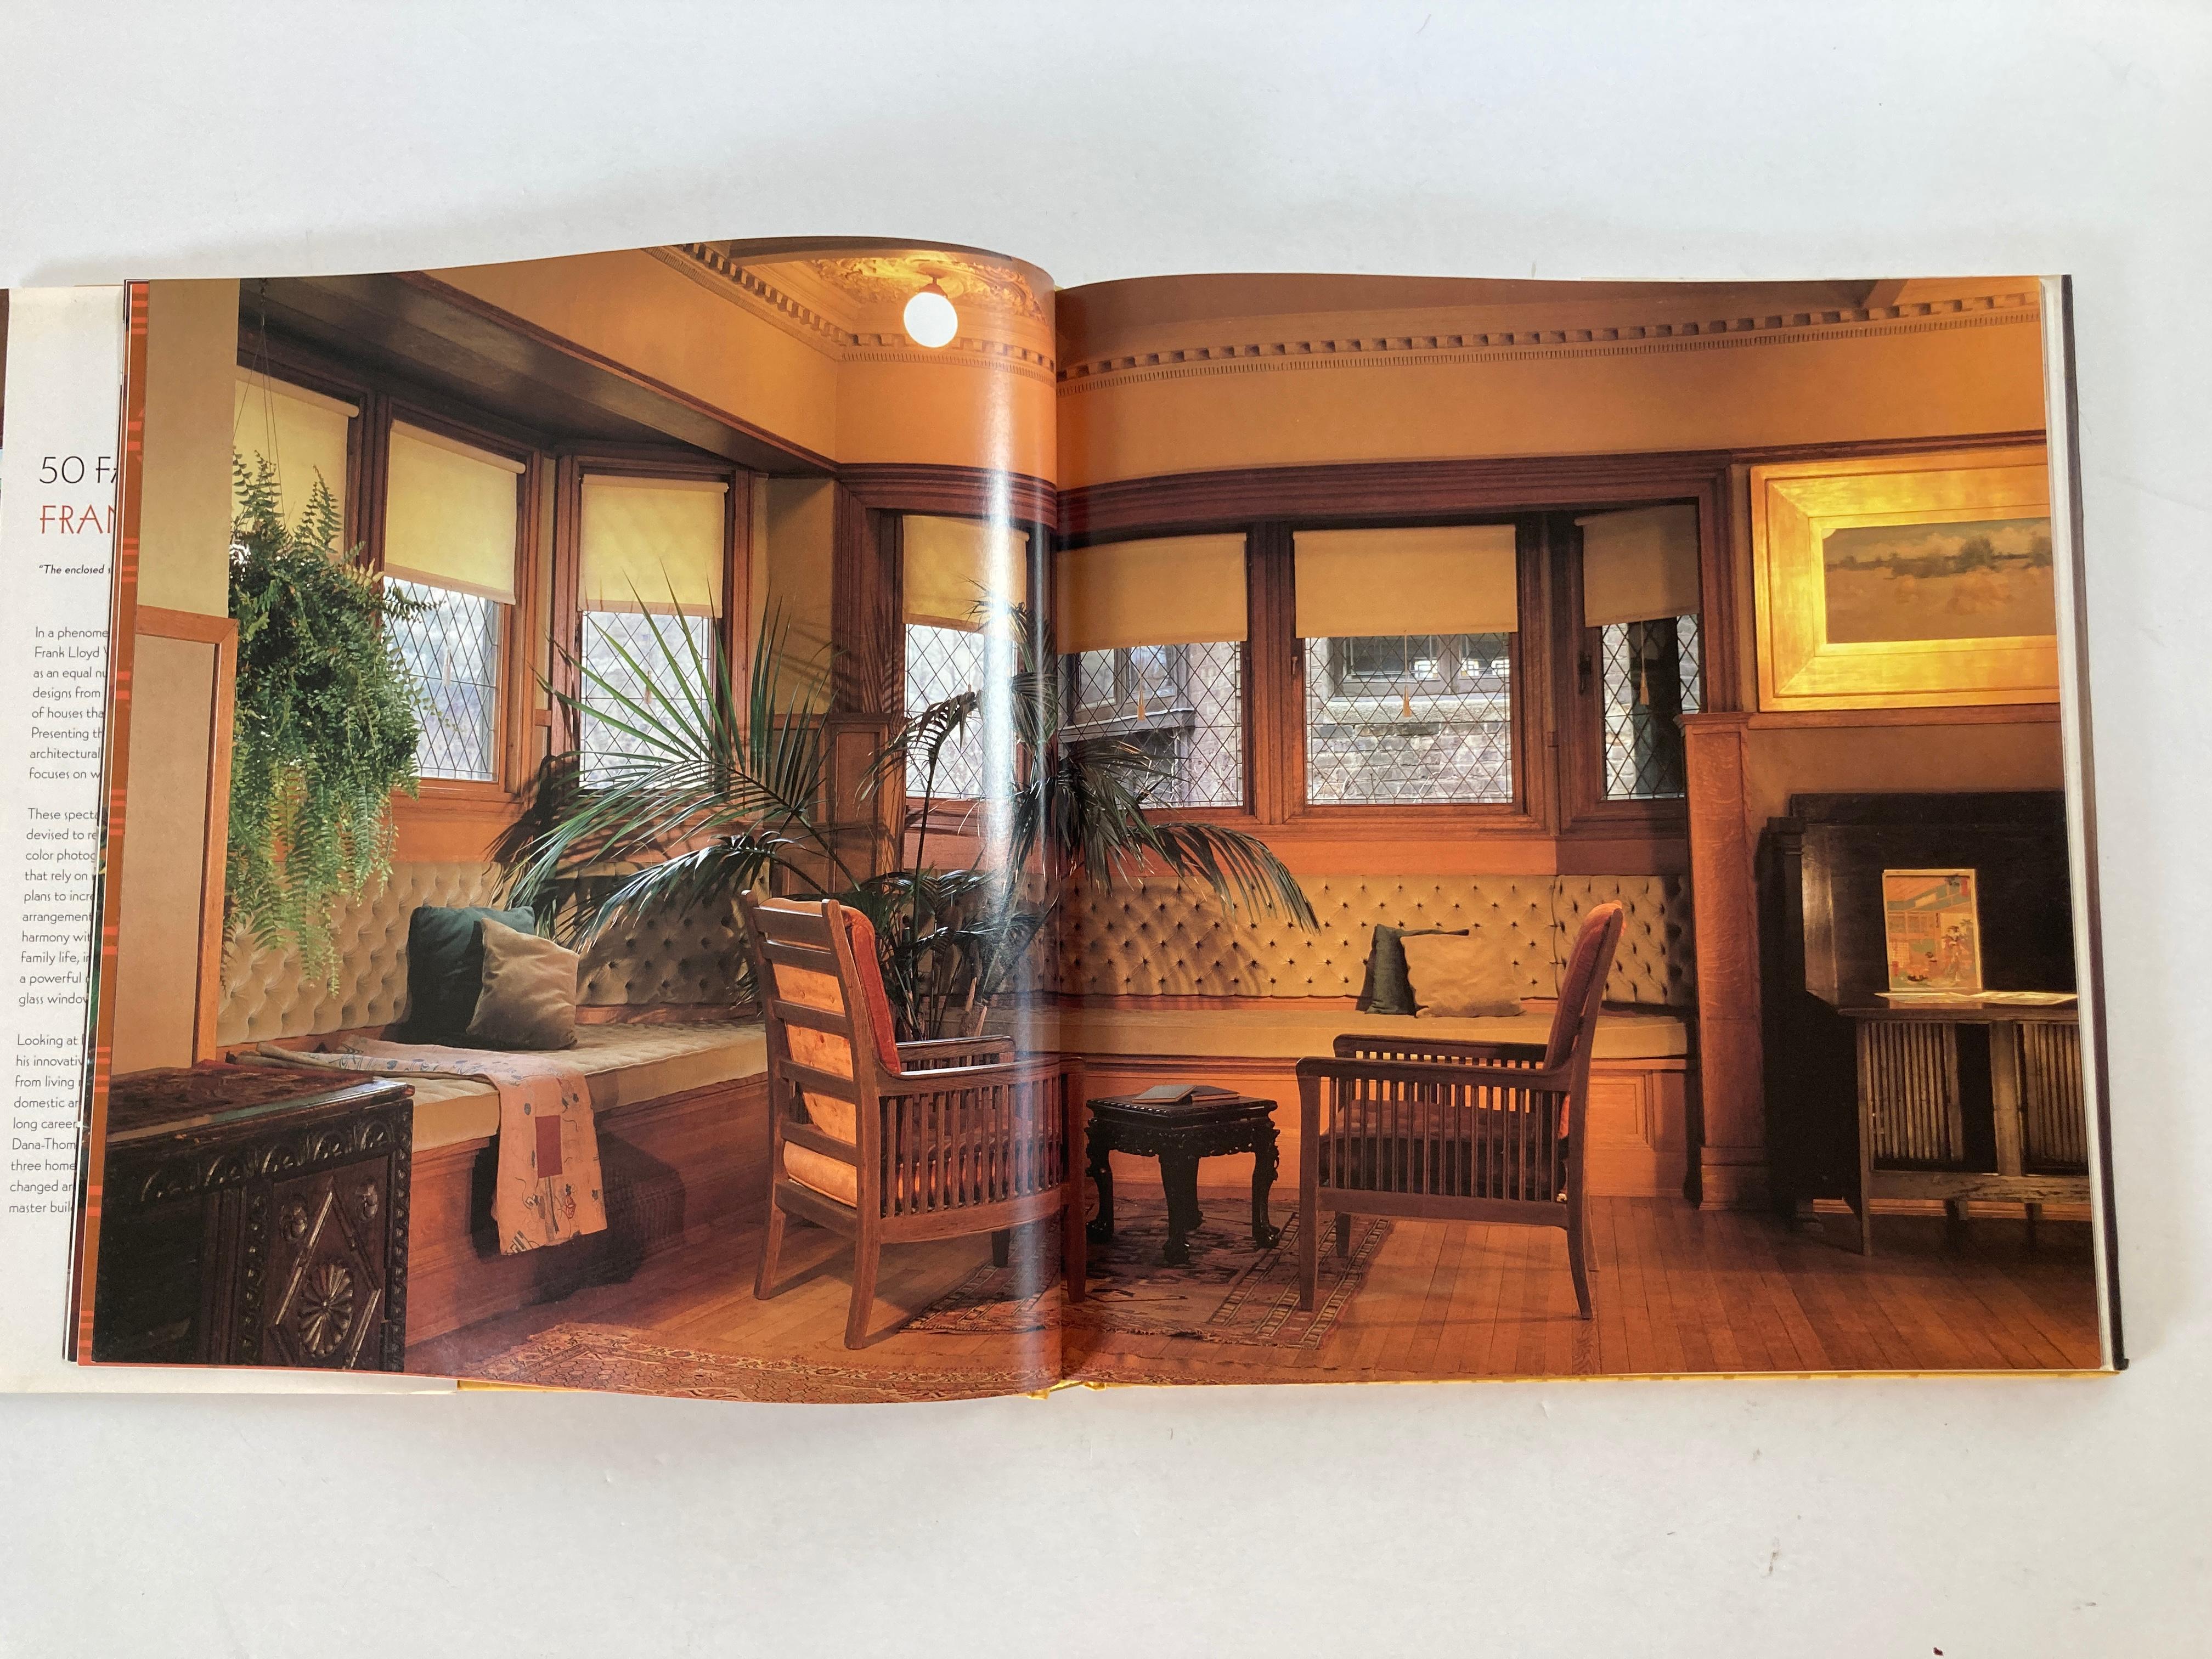 Fifty Favorite Rooms by Frank Lloyd Wright Hardcover Book 1